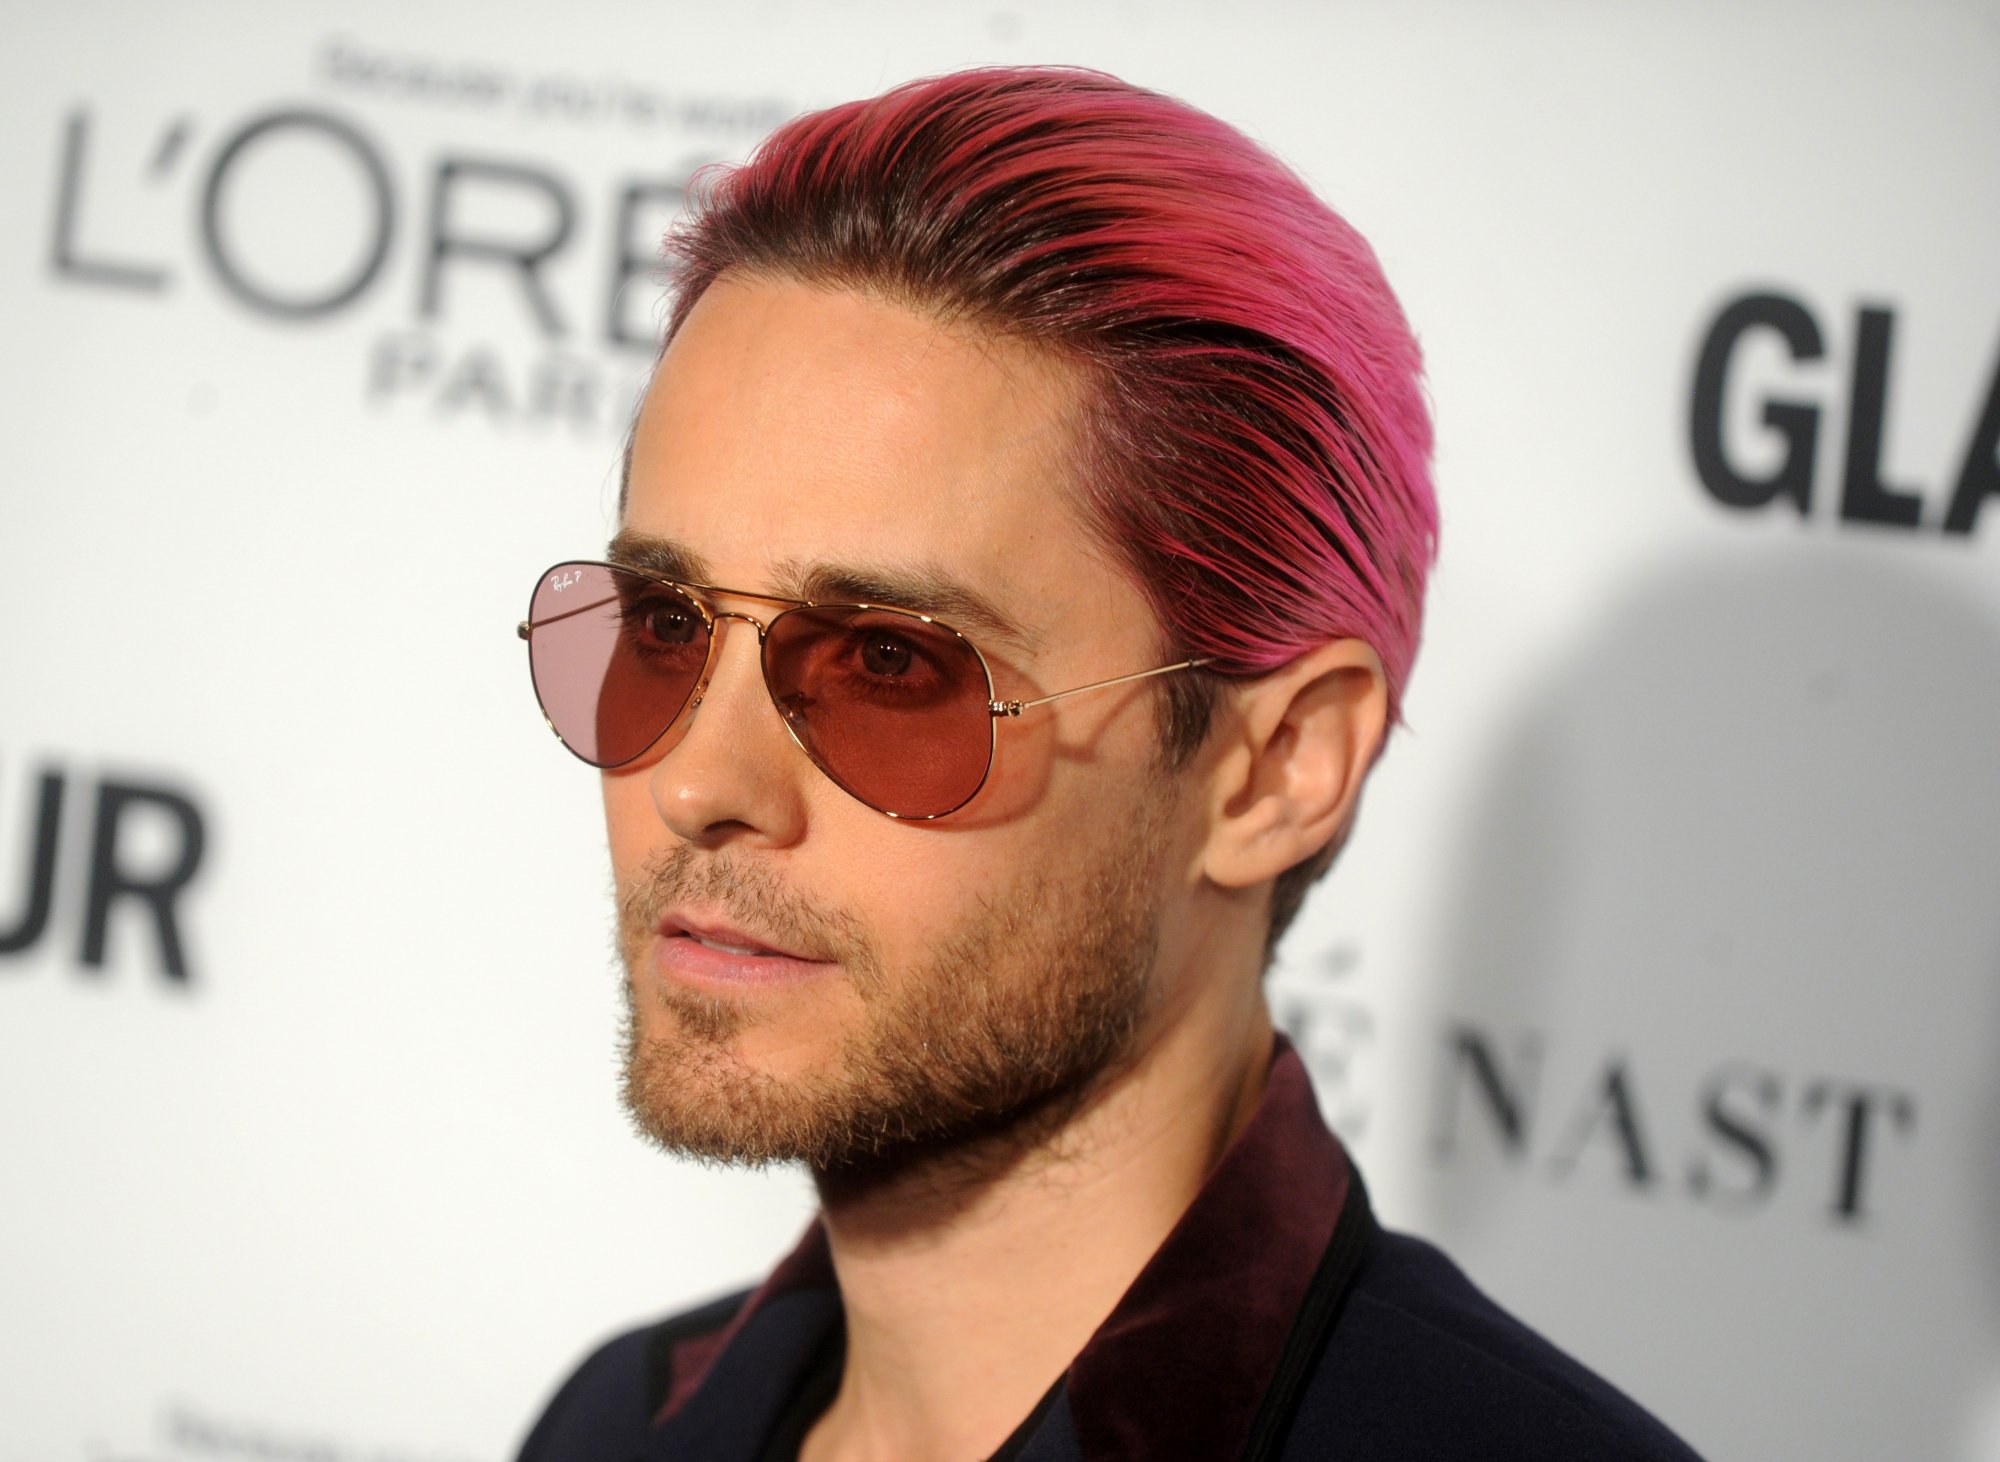 Jared Leto lors des Glamour Women of the Year Awards à New-York en novembre 2015